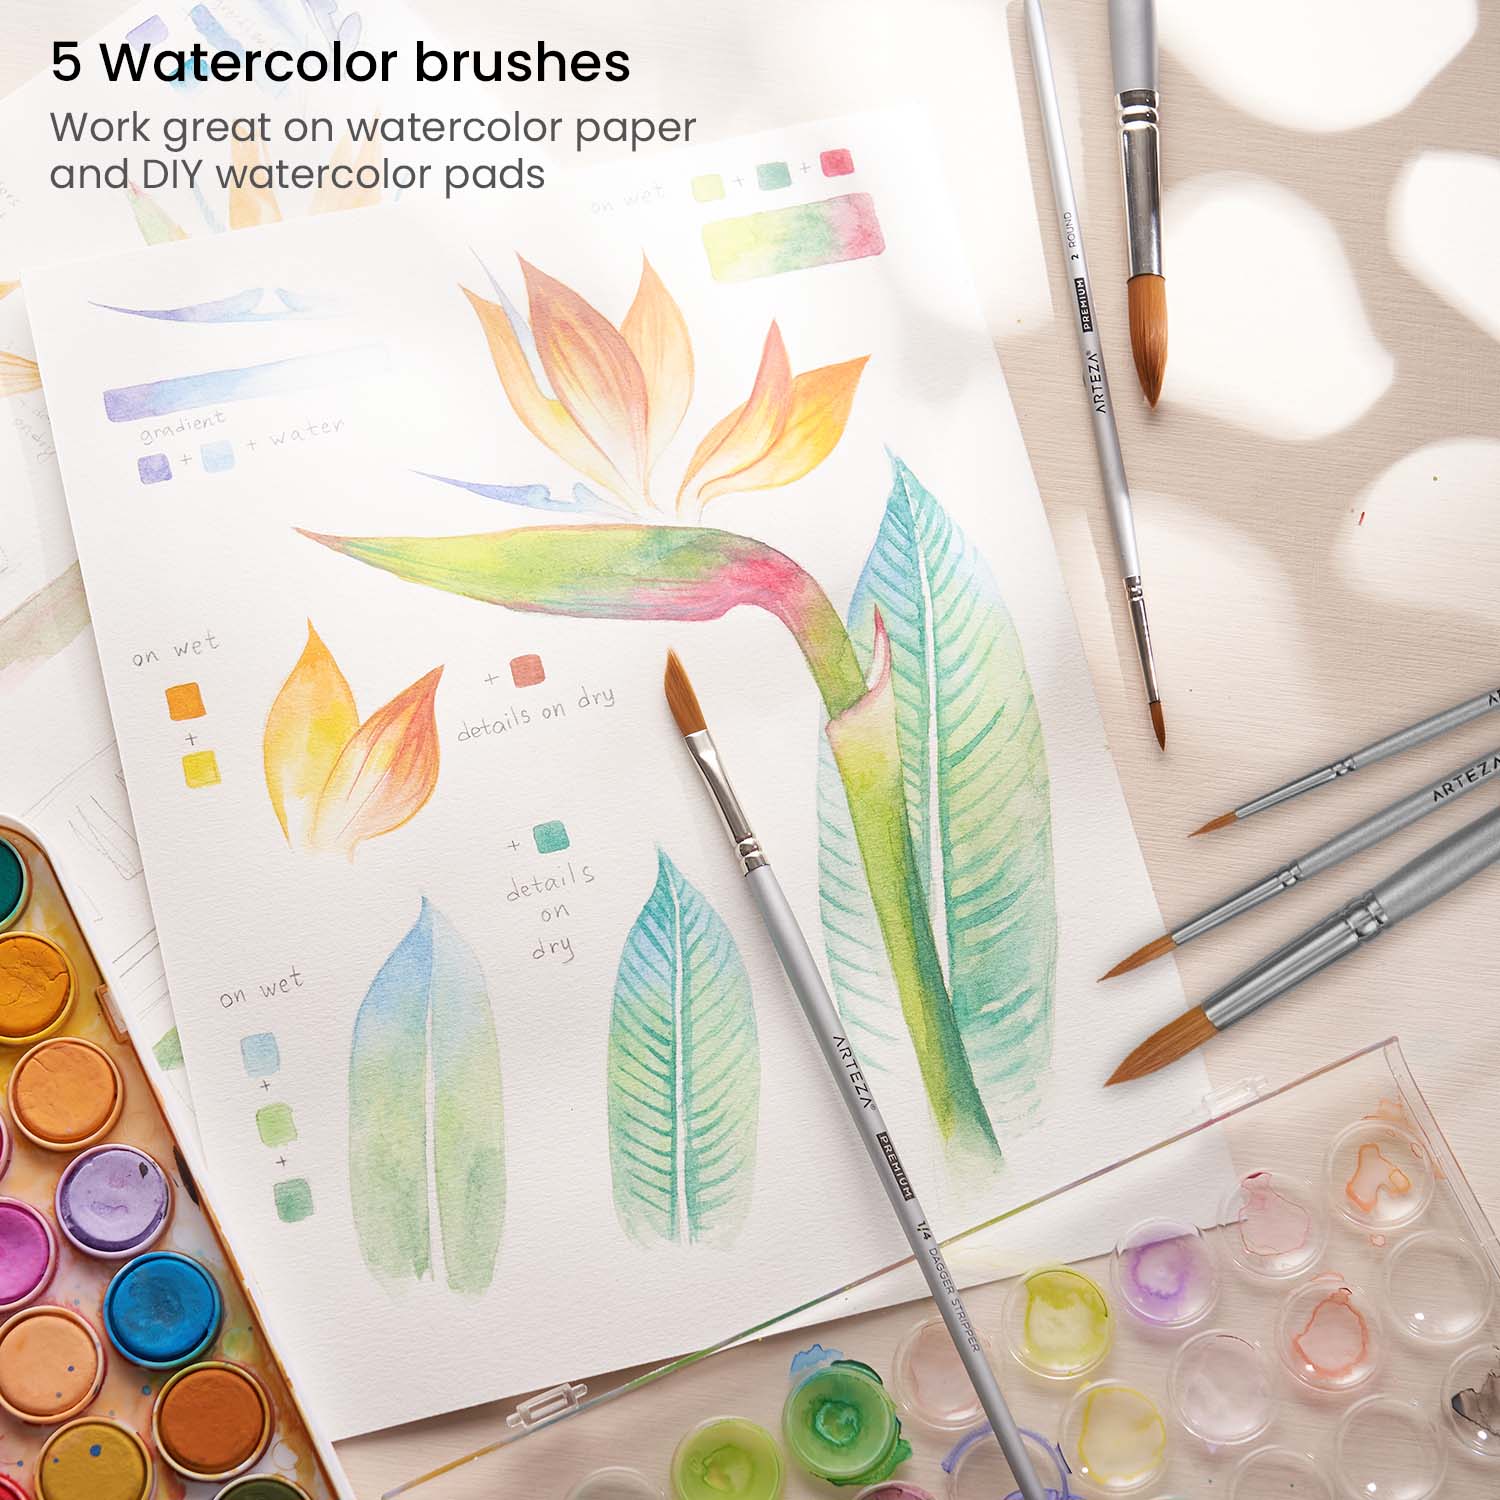 Buy Arteza Classic Watercolor Paint, Set of 36 Vibrant Color Cakes,  Includes 1 Water Brush Pen, Art Supplies Travel Watercolor Kit for Adults,  Artists, and Students Online at Lowest Price Ever in